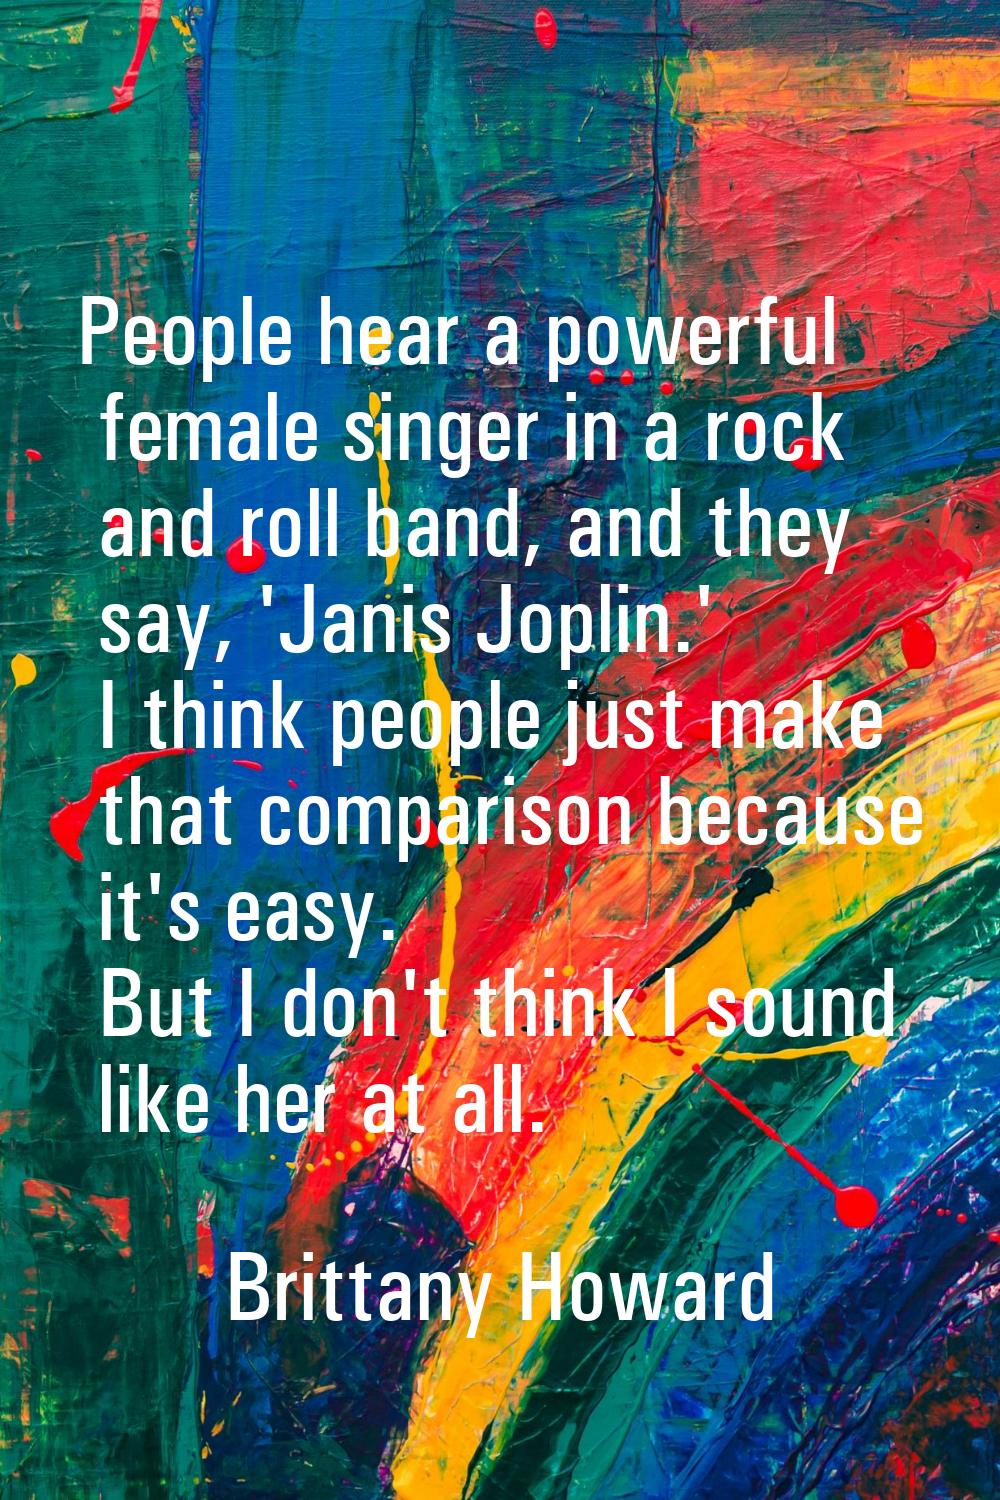 People hear a powerful female singer in a rock and roll band, and they say, 'Janis Joplin.' I think